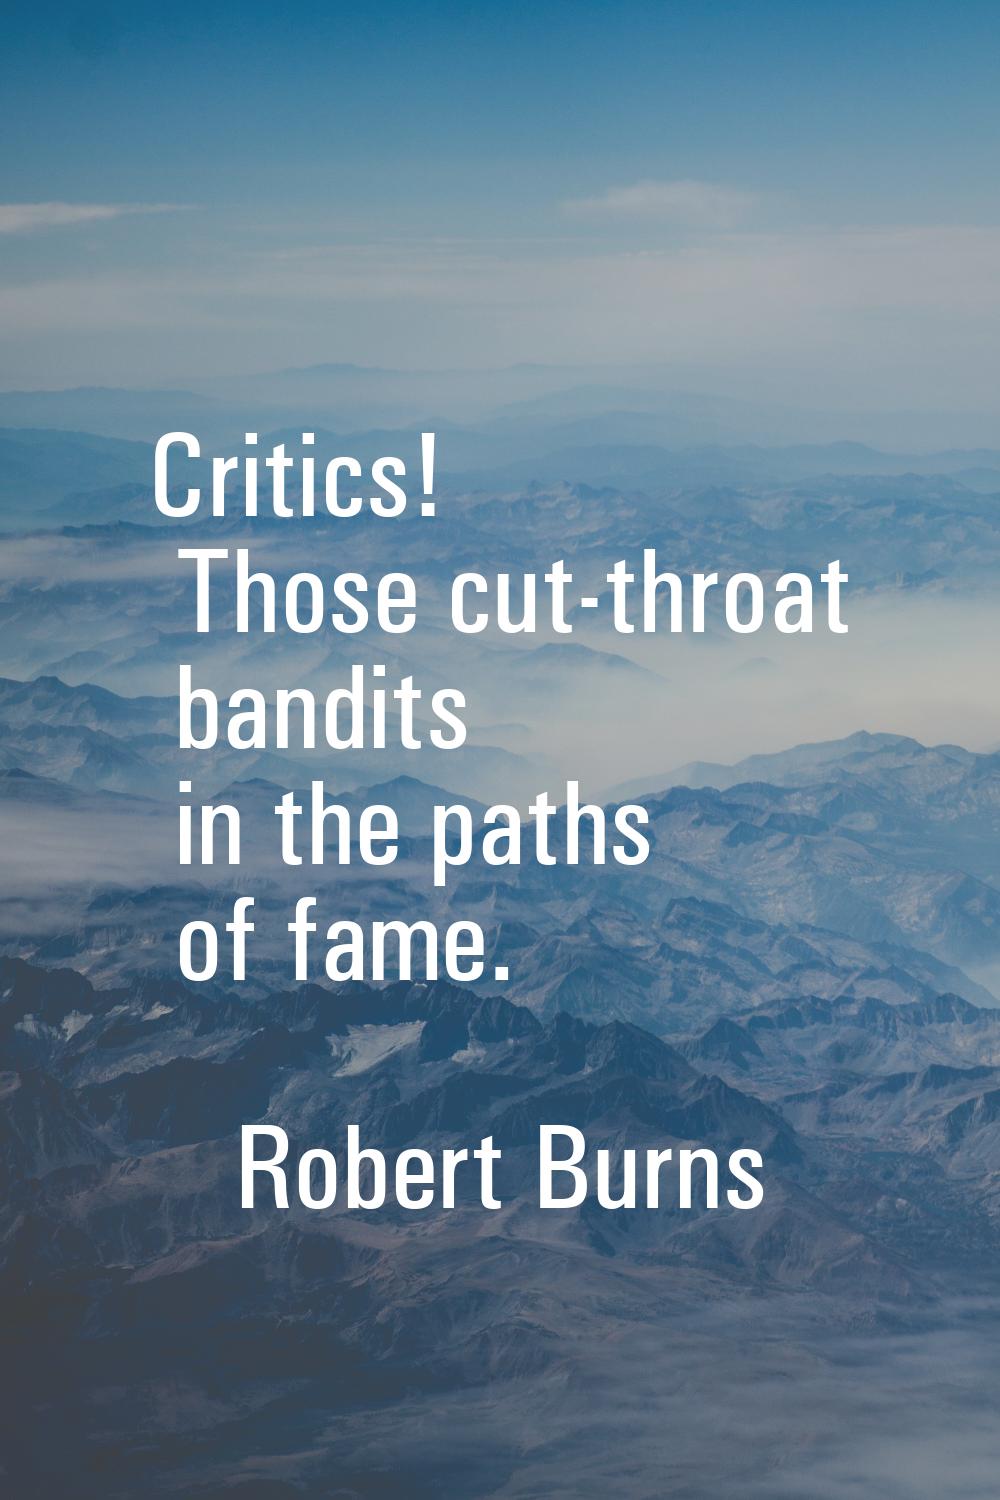 Critics! Those cut-throat bandits in the paths of fame.